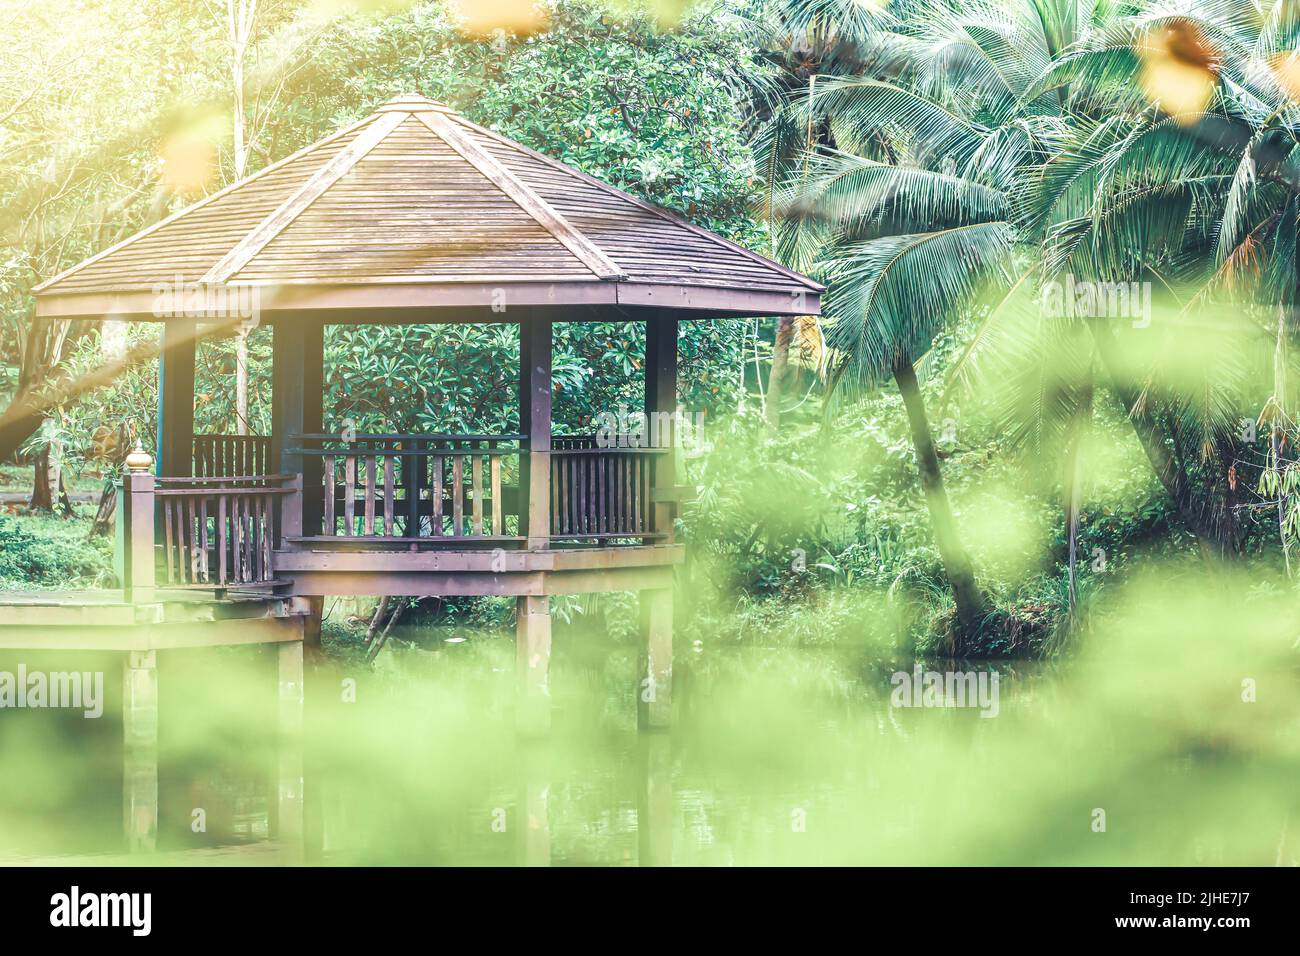 An empty brown wooden pavilion in a pond is surrounded by a green tropical garden with coconut palm trees. Stock Photo